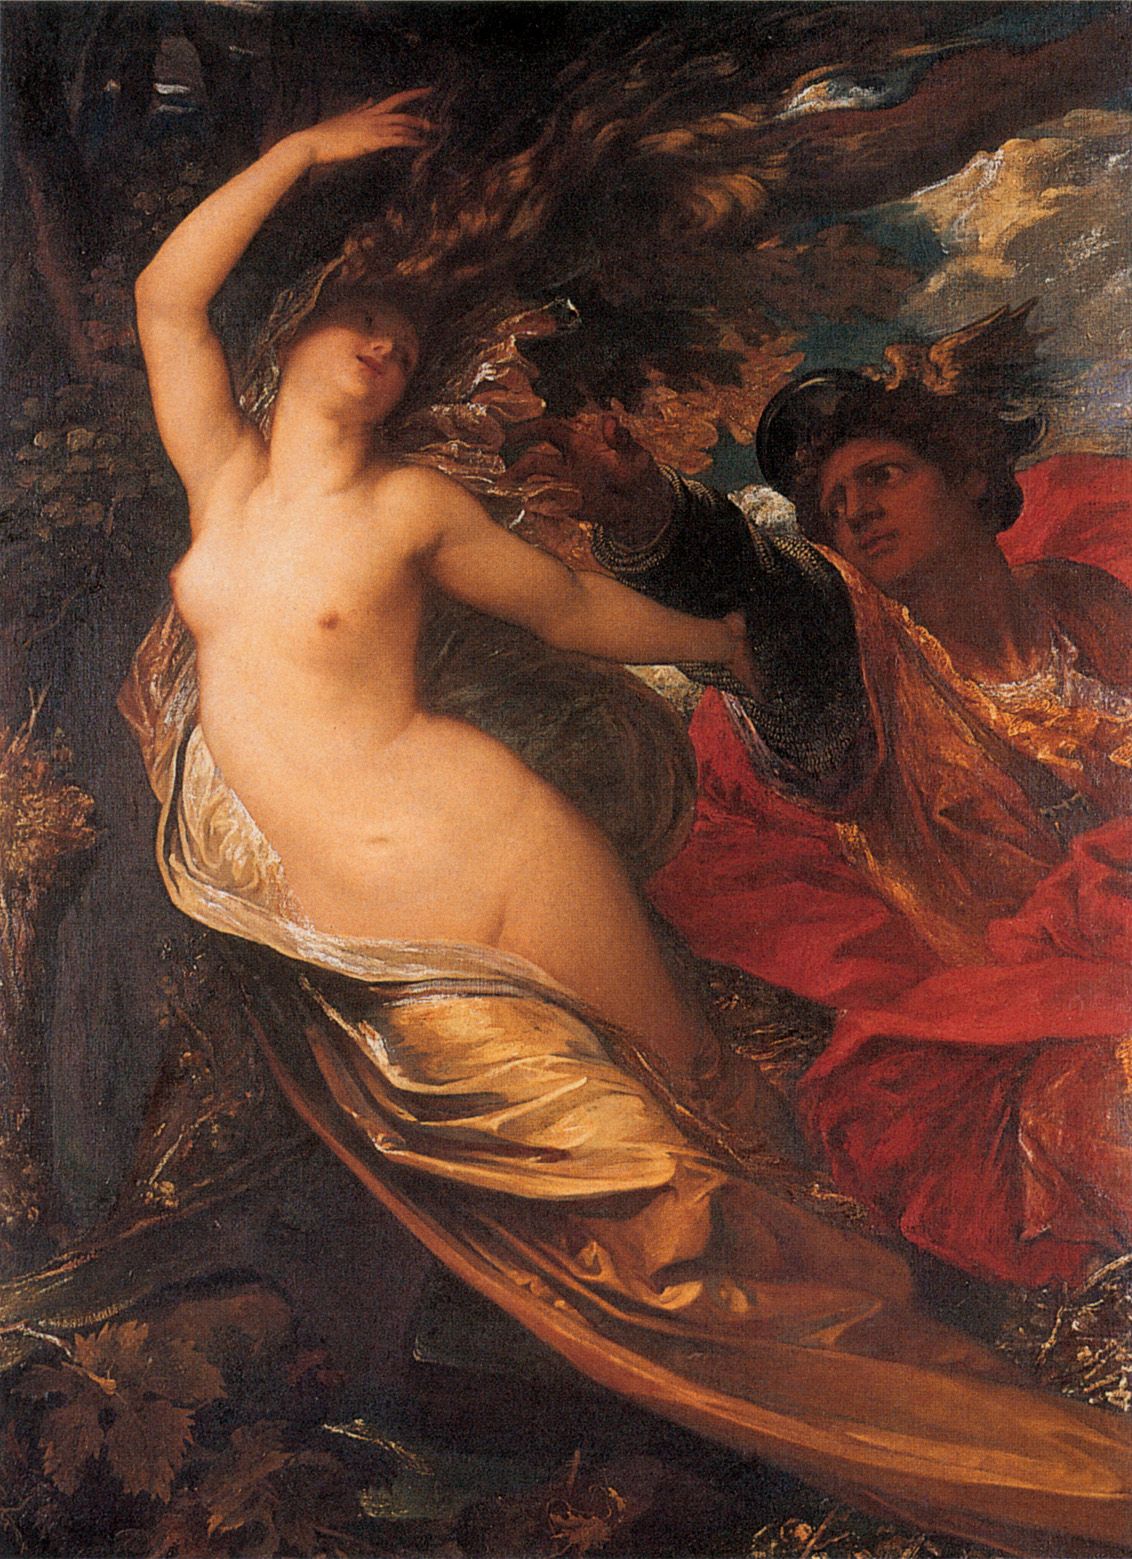 Orlando Pursuing the Fata Morgana by George Frederick Watts